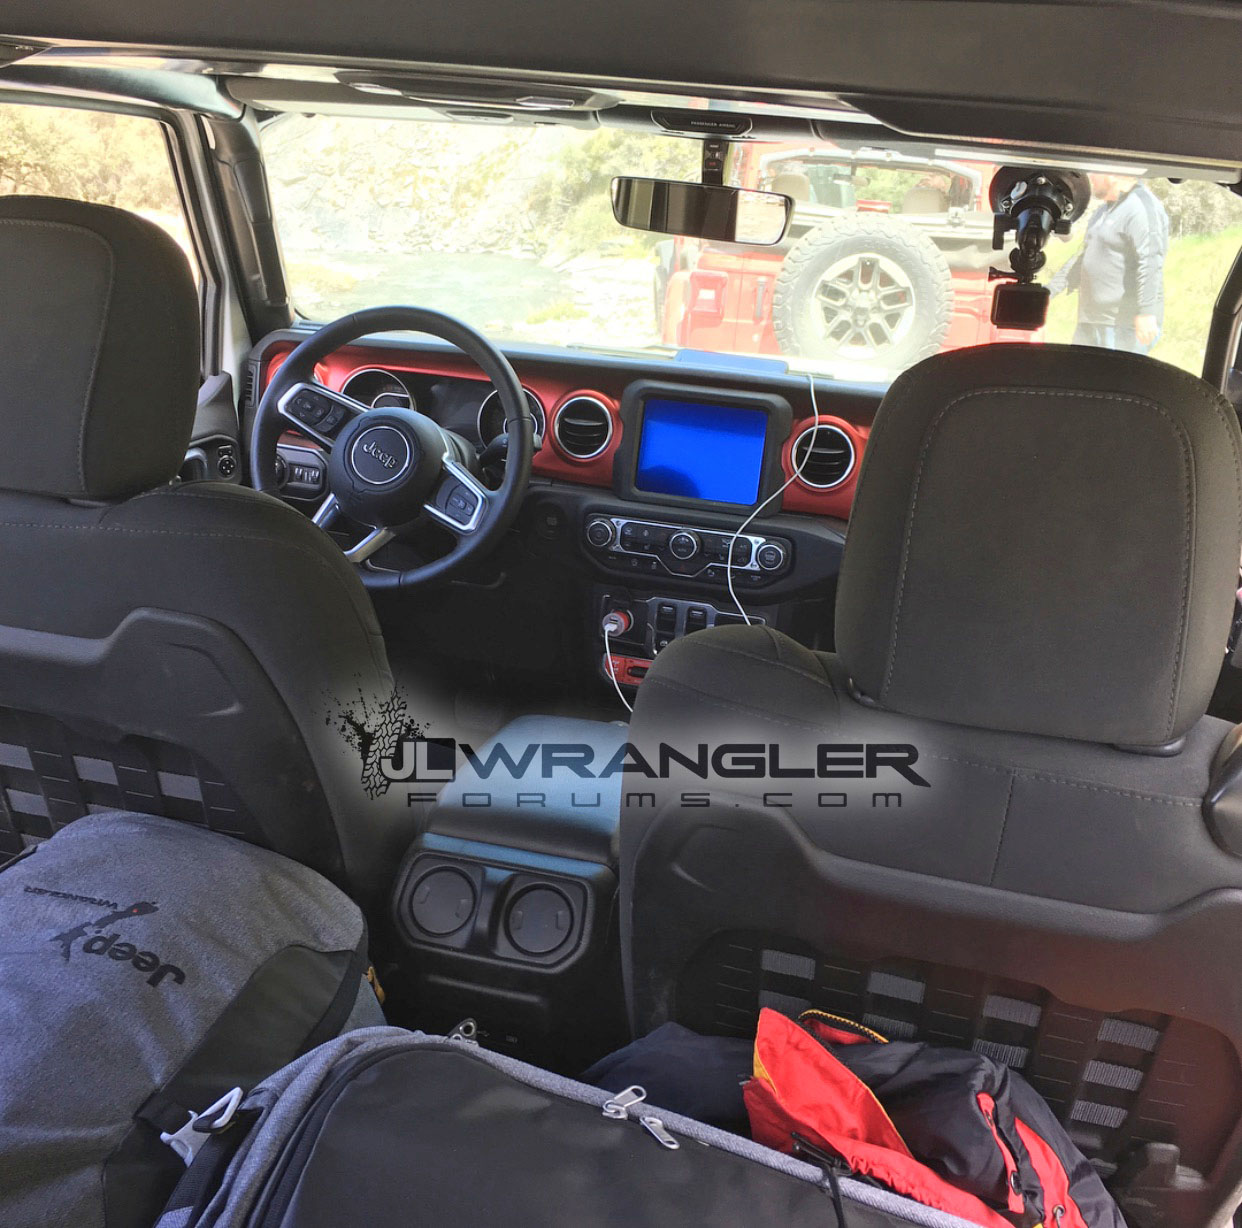 Full Interior View Of The 2018 Jl Wrangler 2018 Jeep